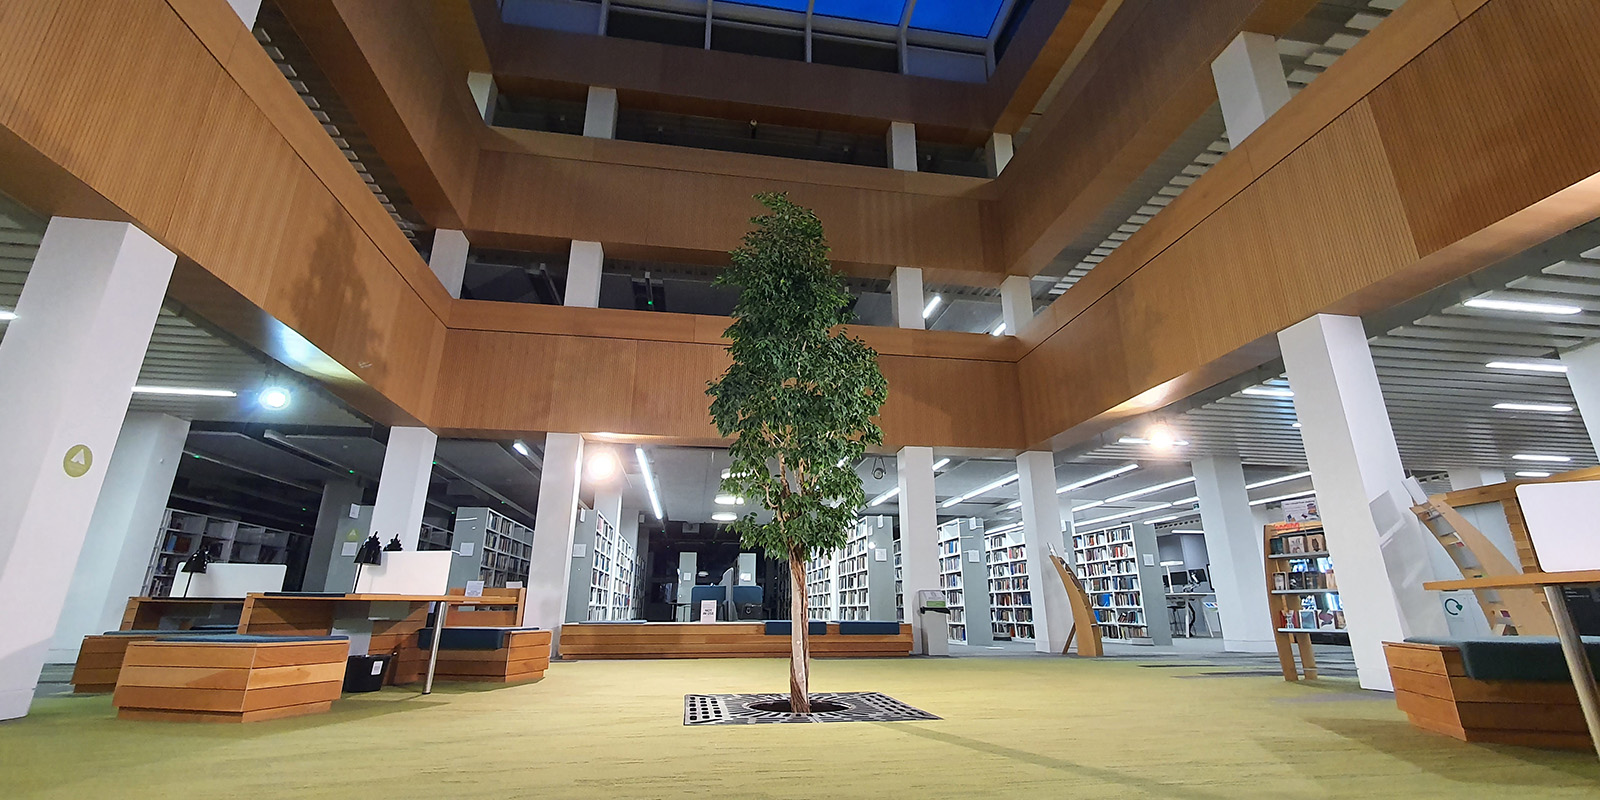 51 library foyer with the living tree in the centre.